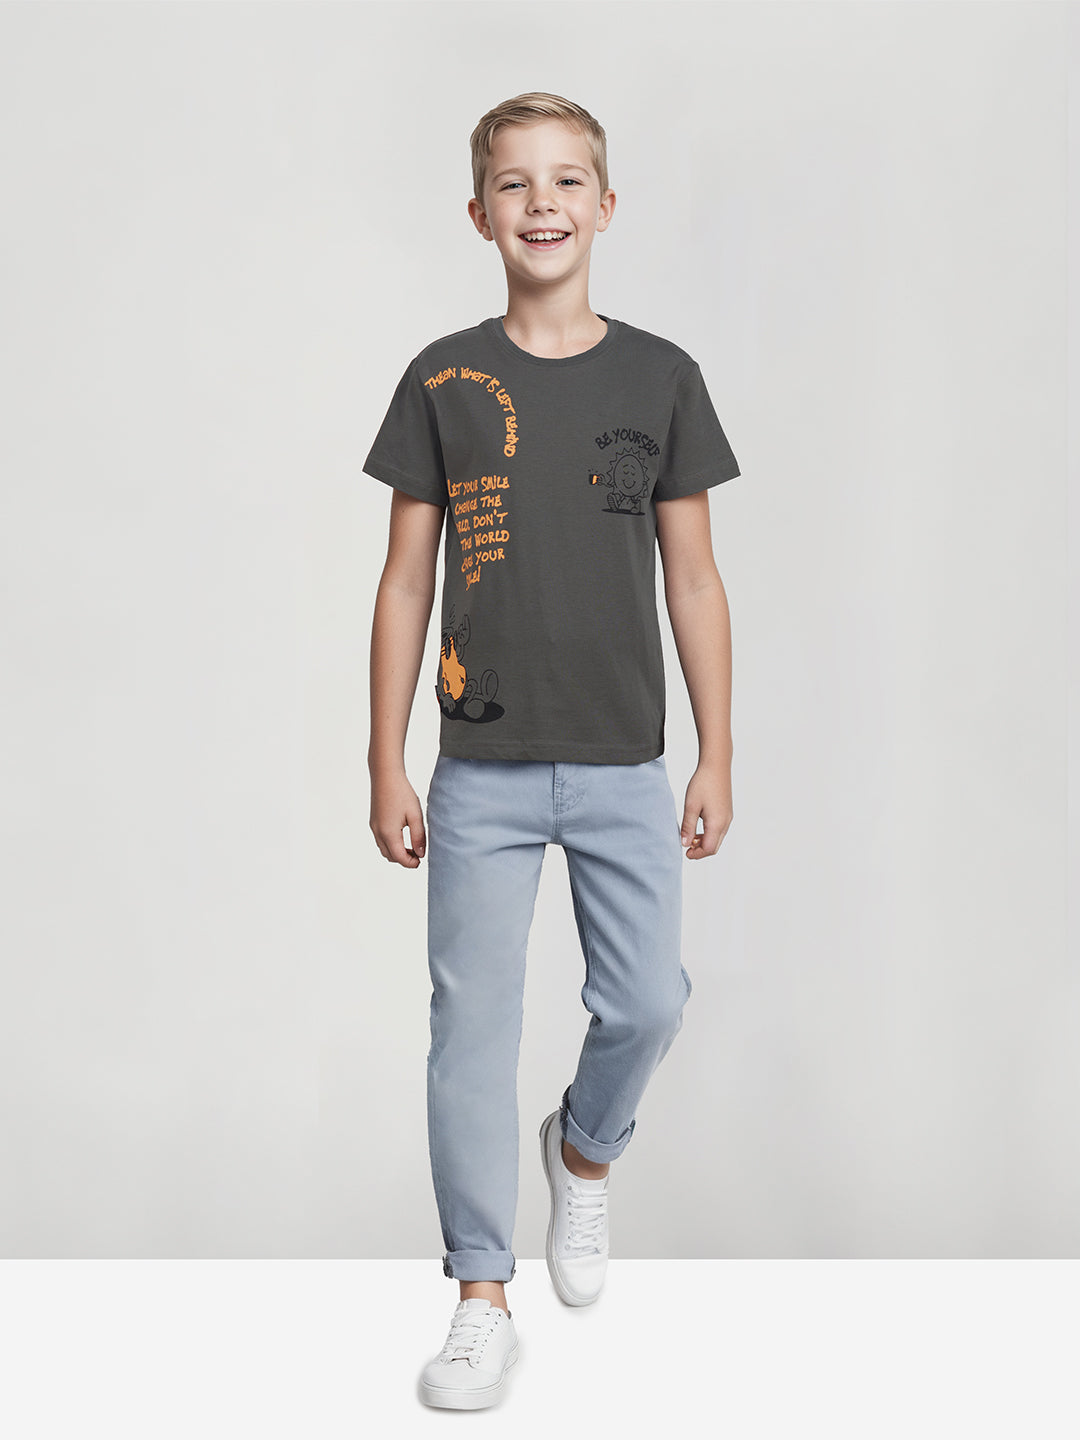 Boys Grey Round Neck Knitted Cotton Printed T-Shirt